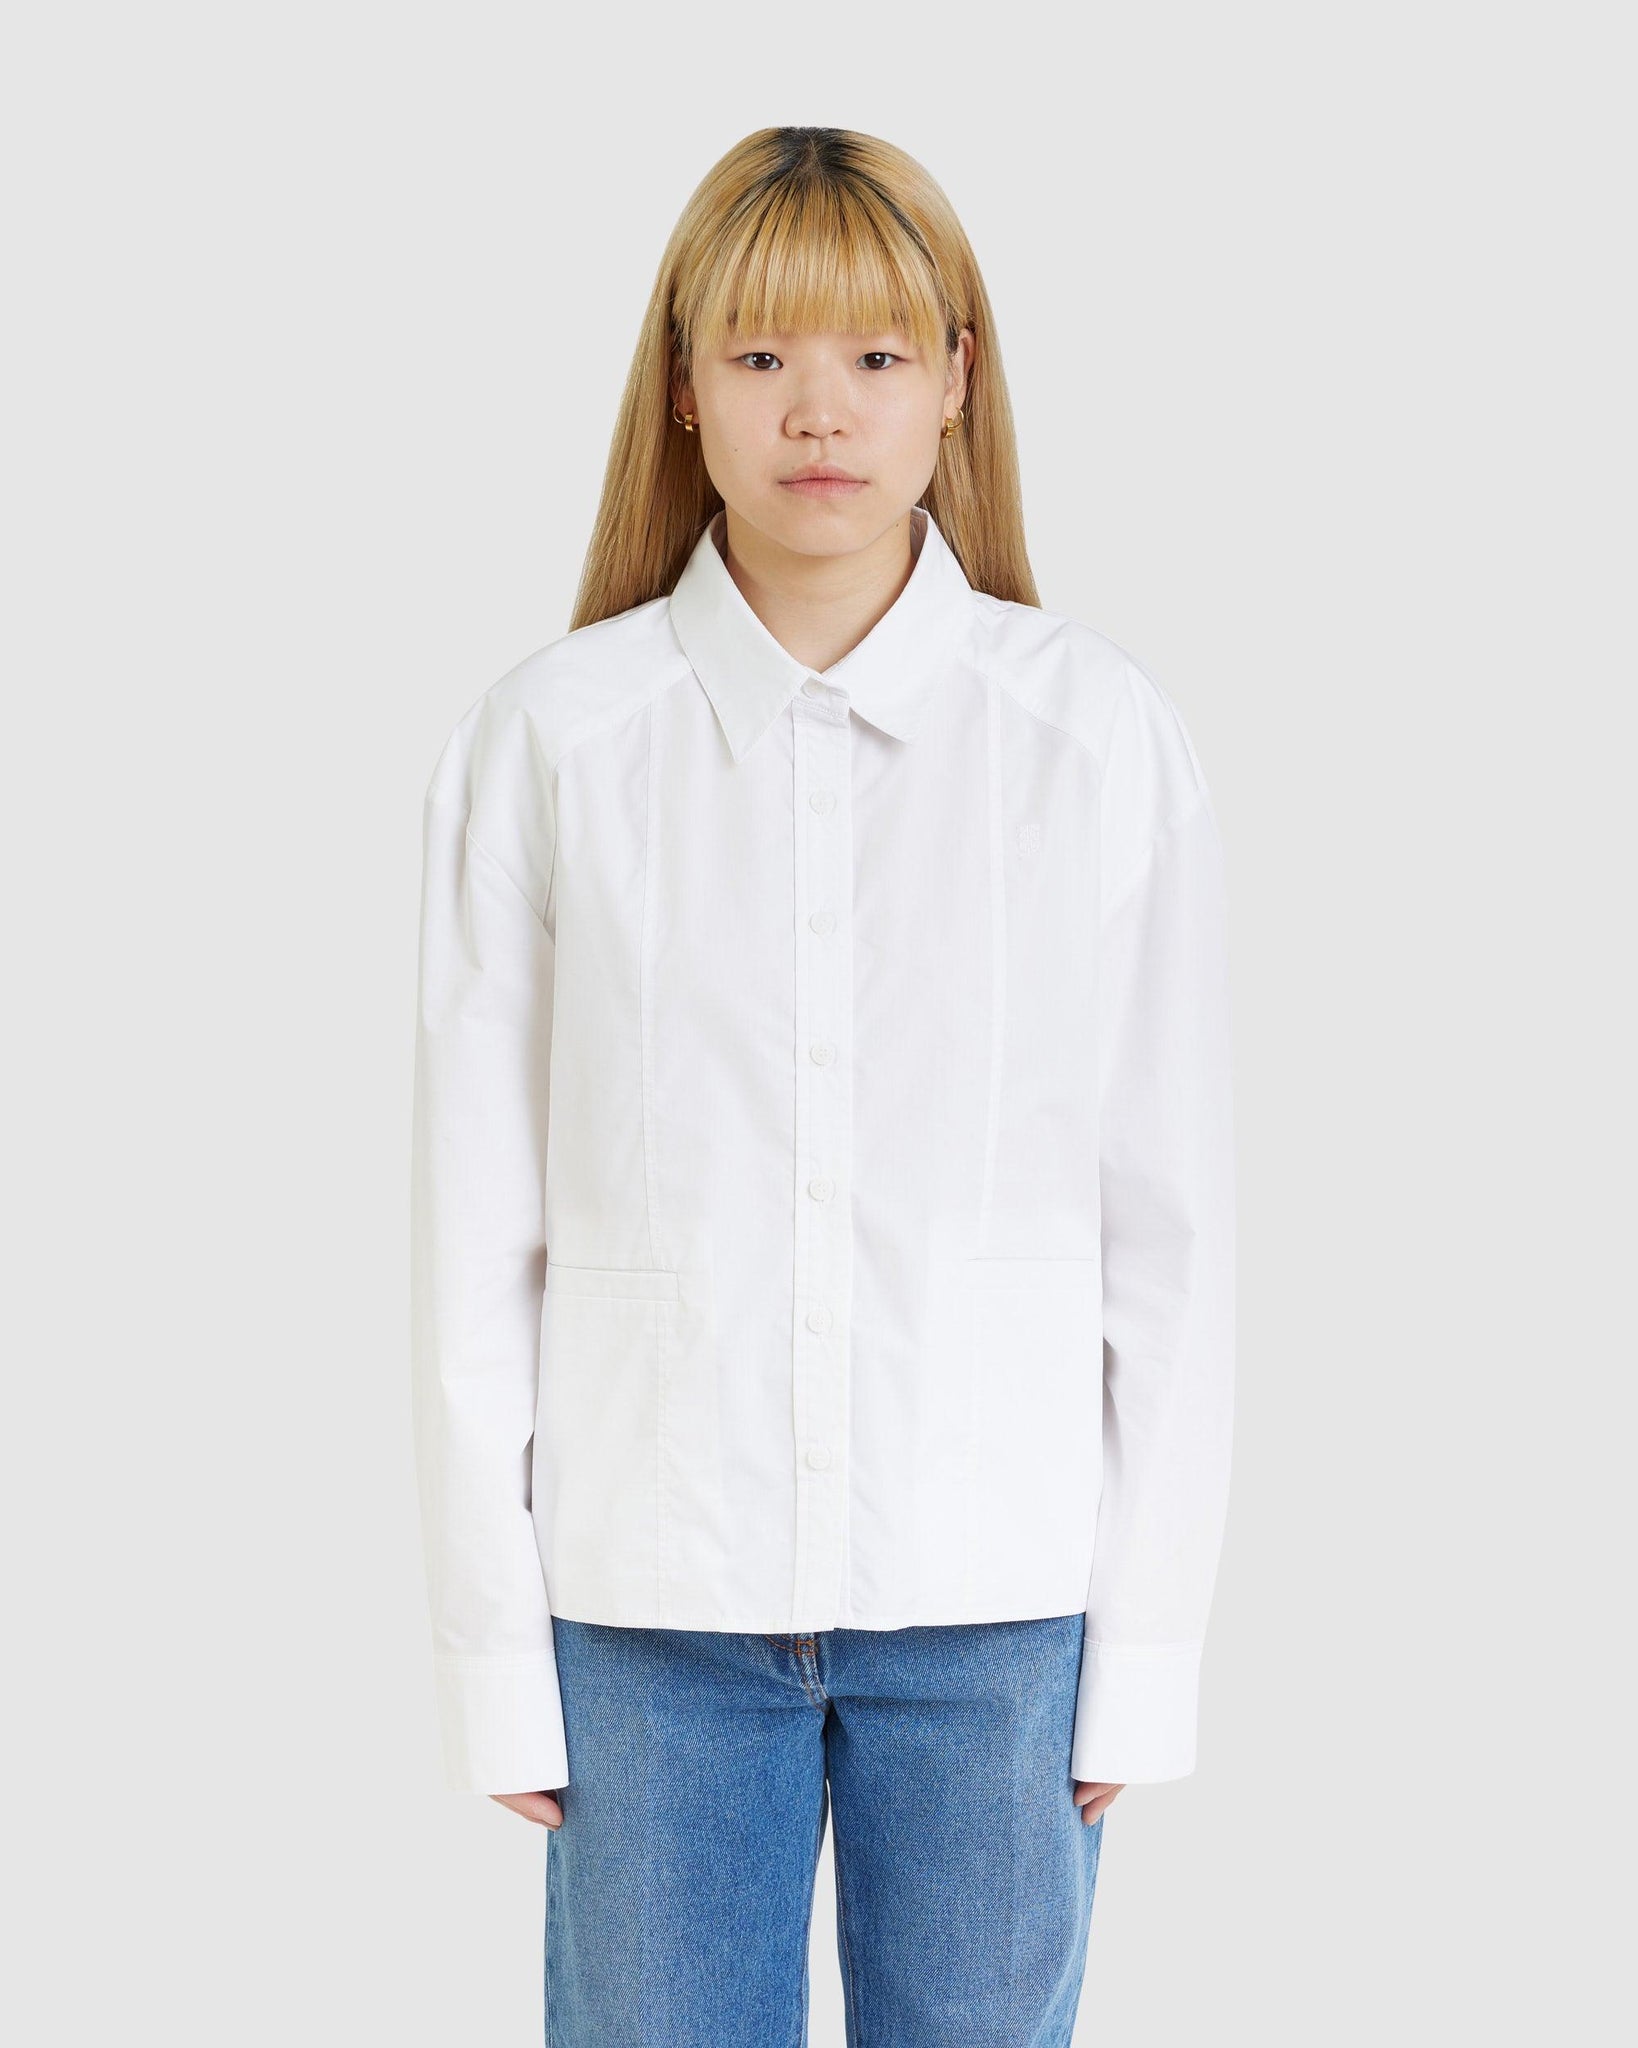 Clasp Shirt - {{ collection.title }} - Chinatown Country Club 